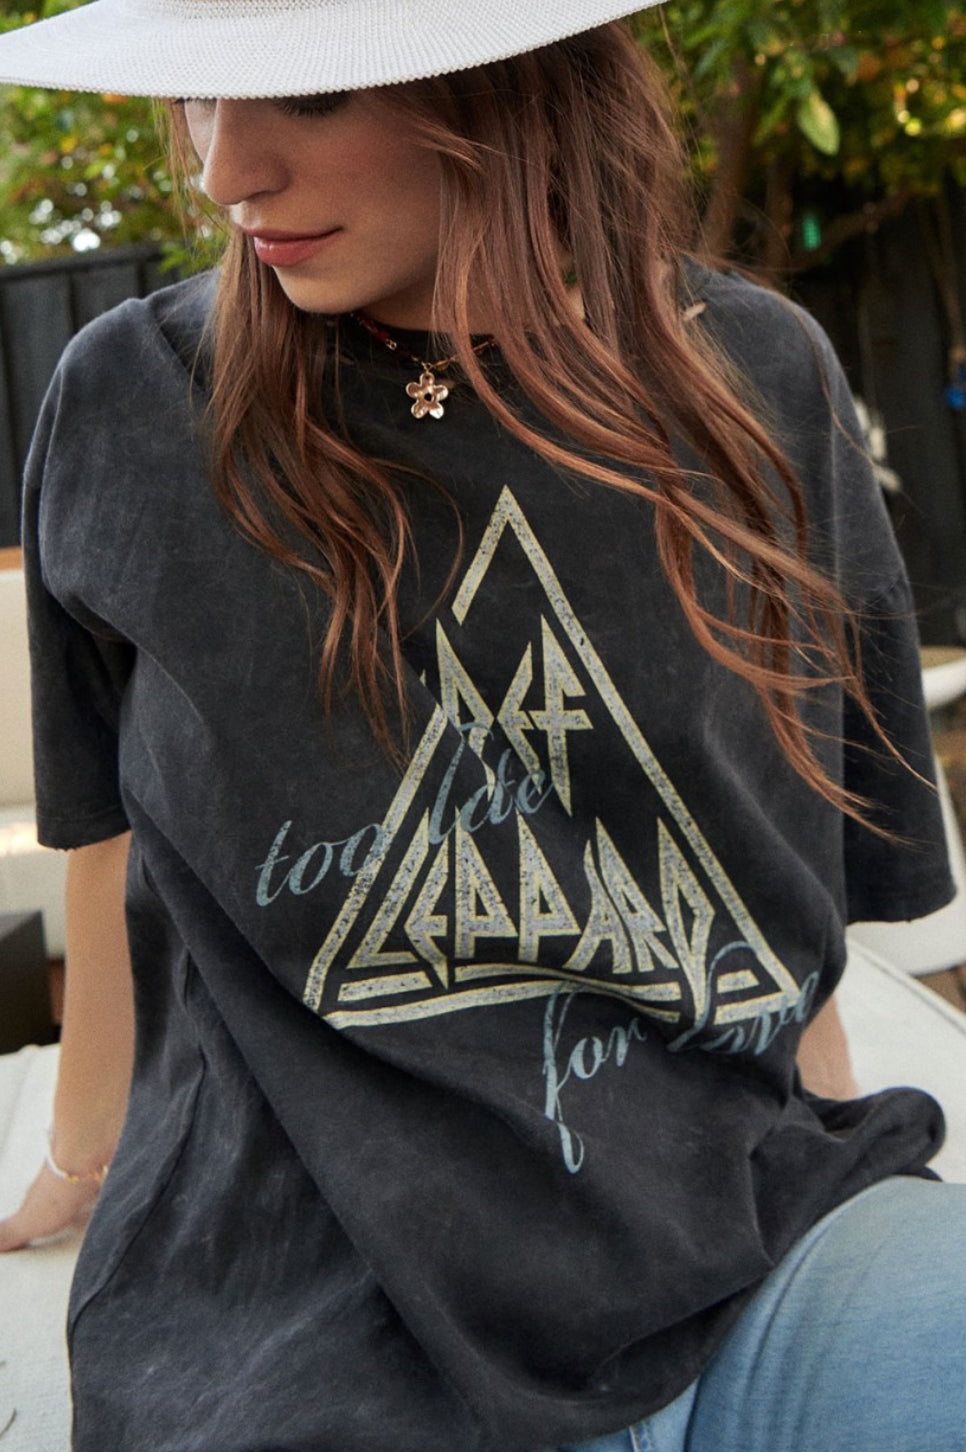 Def Leppard TOO LATE FOR LOVE Band Tee